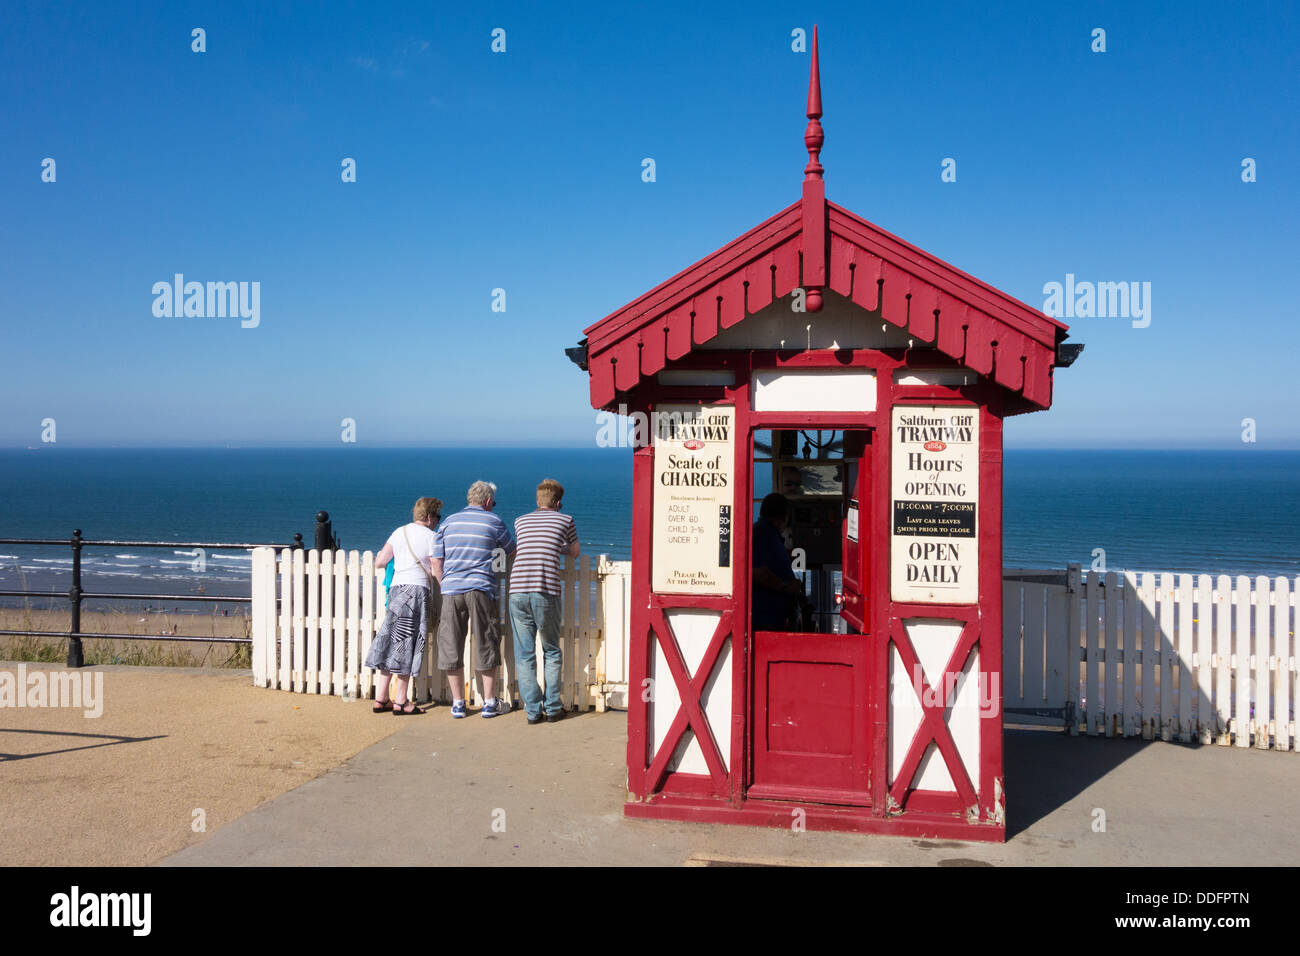 Saltburn's Cliff lift ticket office. Saltburn by the sea, North Yorkshire, England, UK Stock Photo